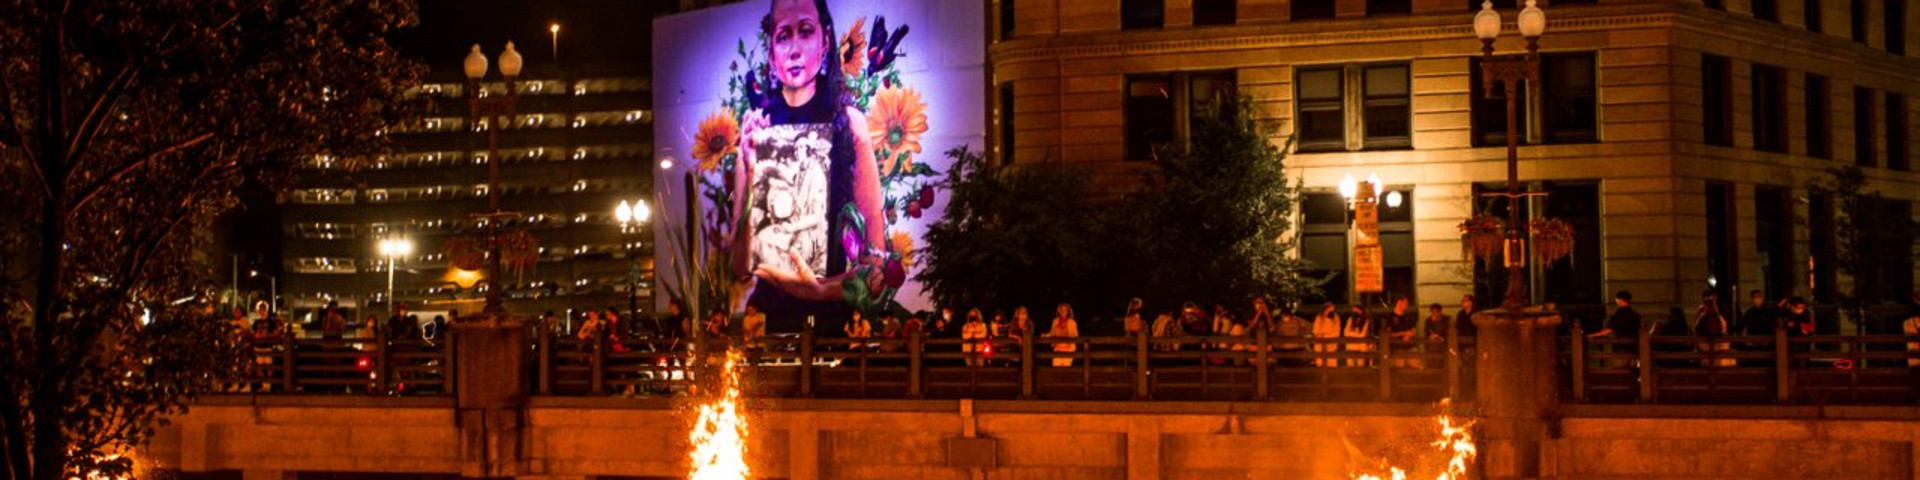 Braziers burn on the river and a mural of a young girl is illuminated in the background.